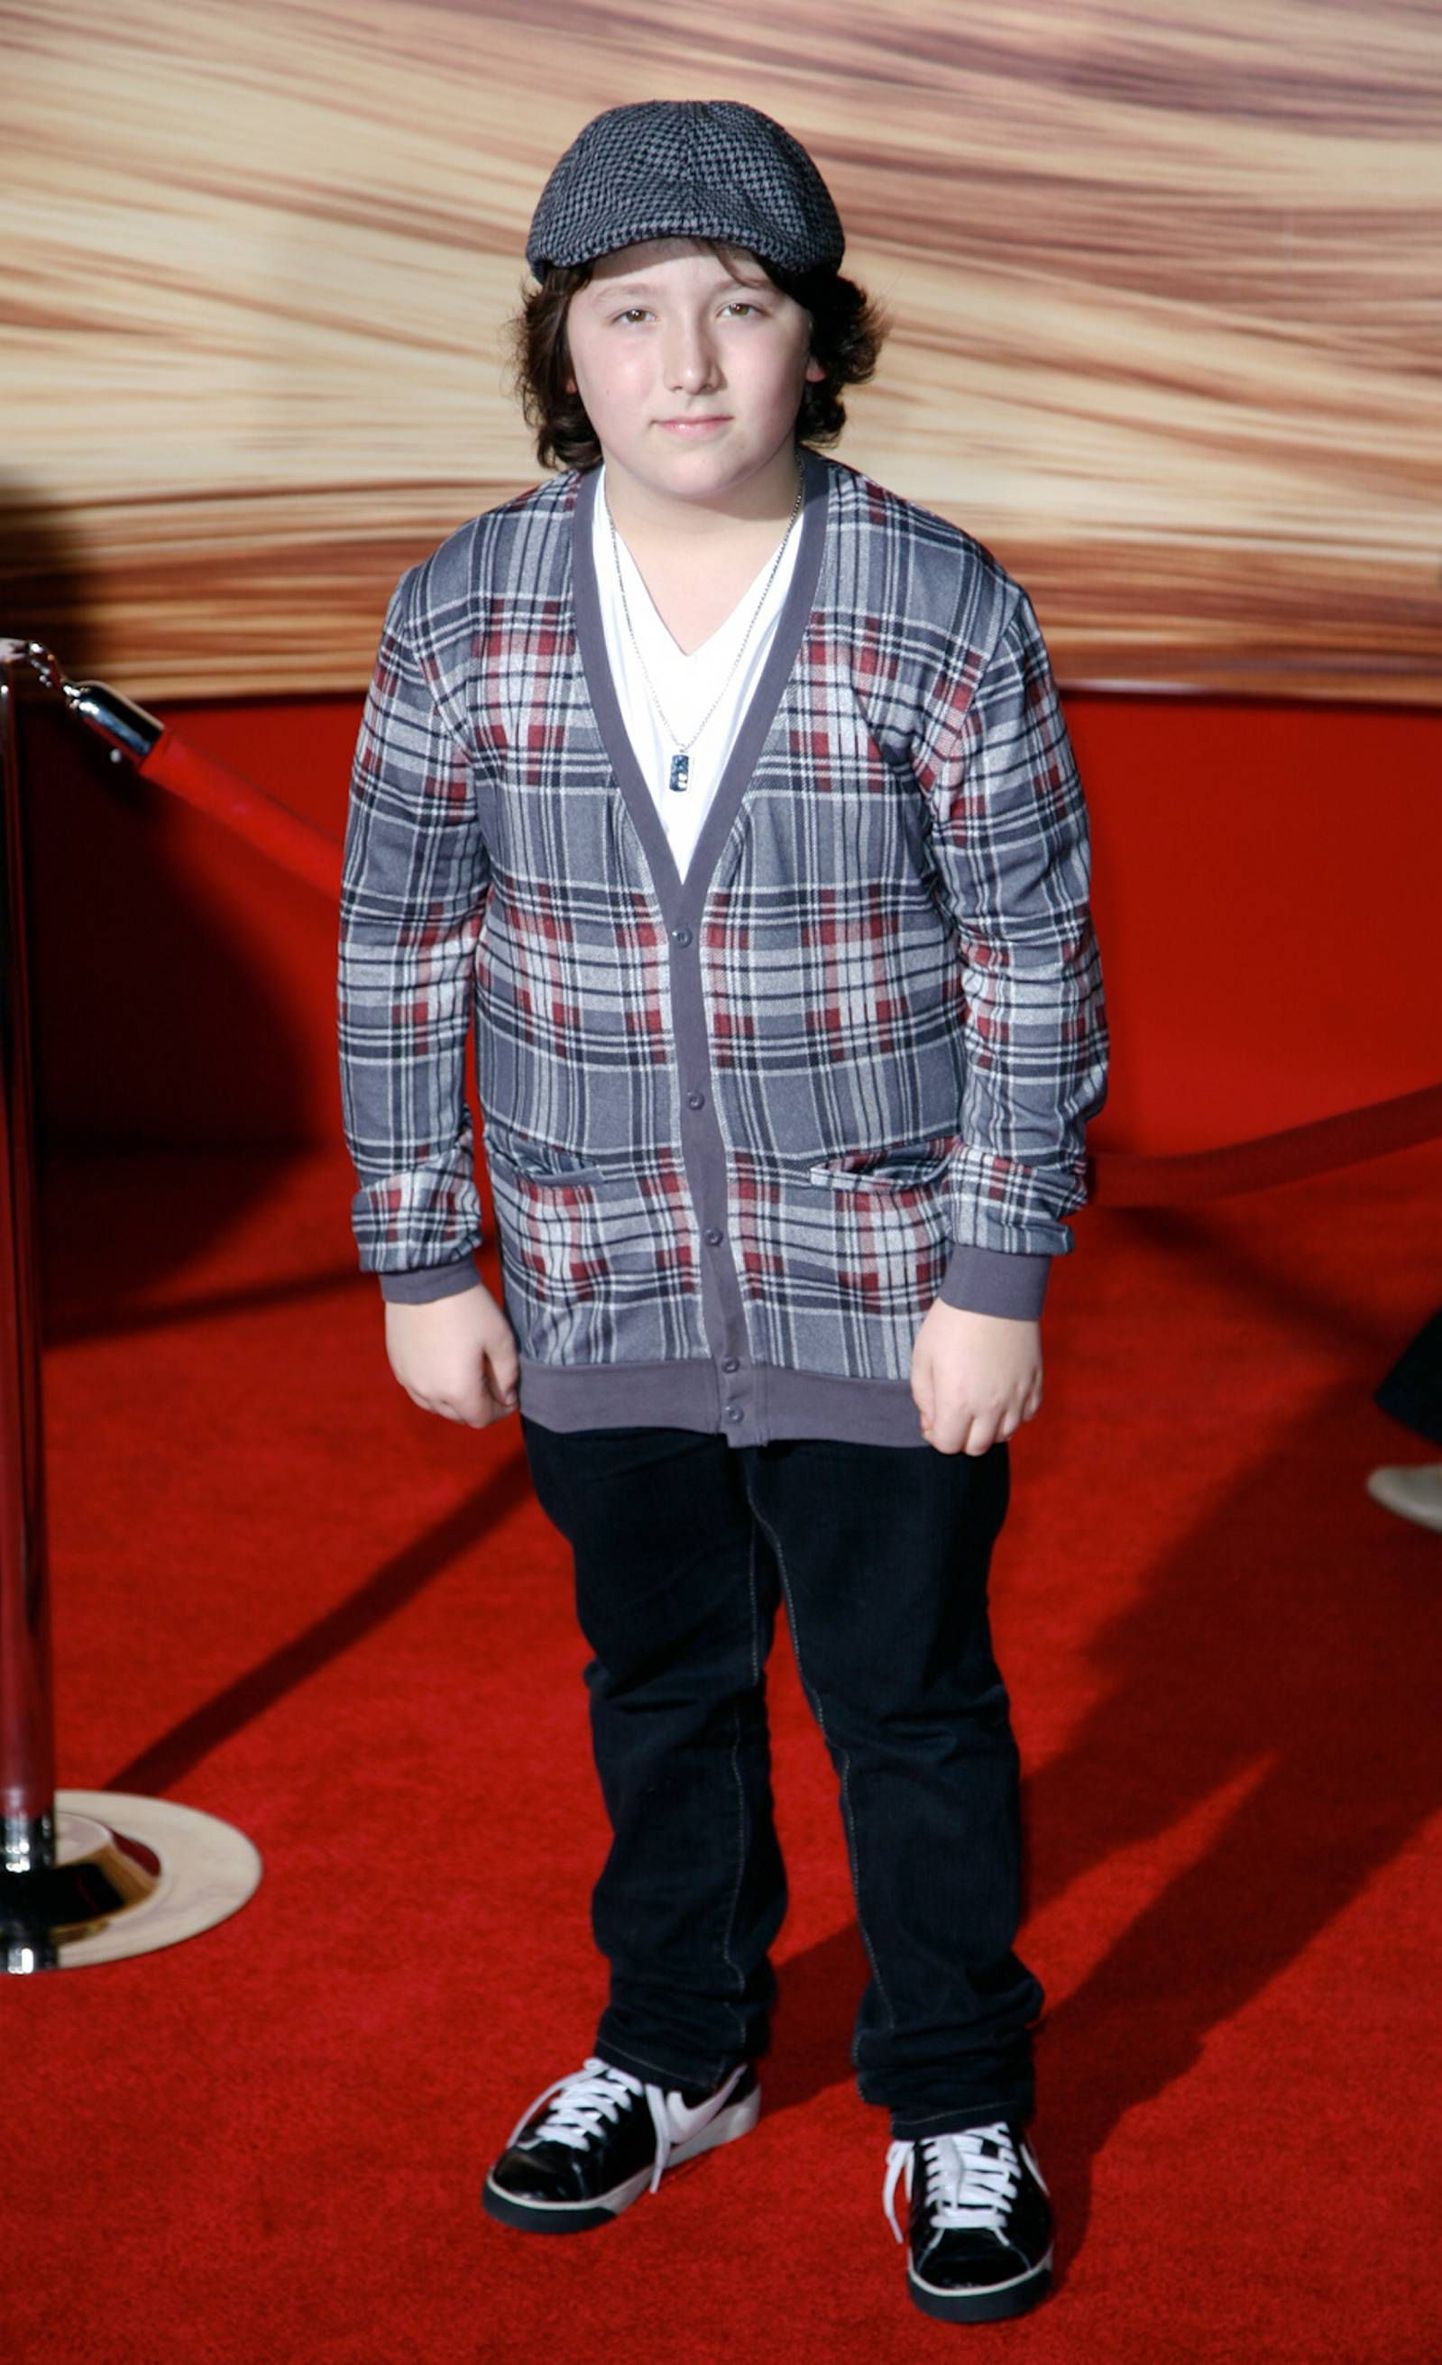 MAVRIXONLINE.COM - DAILY MAIL ONLINE OUT - Frankie Jonas at the premiere of "Tangled" at the El Capitan Theatre in Hollywood, CA. 11/14/10. Fees must be agreed for image use. Byline, credit, TV usage, web usage or linkback must read MAVRIXONLINE.COM. Failure to byline correctly will incur double the agreed fee. Tel: 305 542 9275 or 954 698 6777.